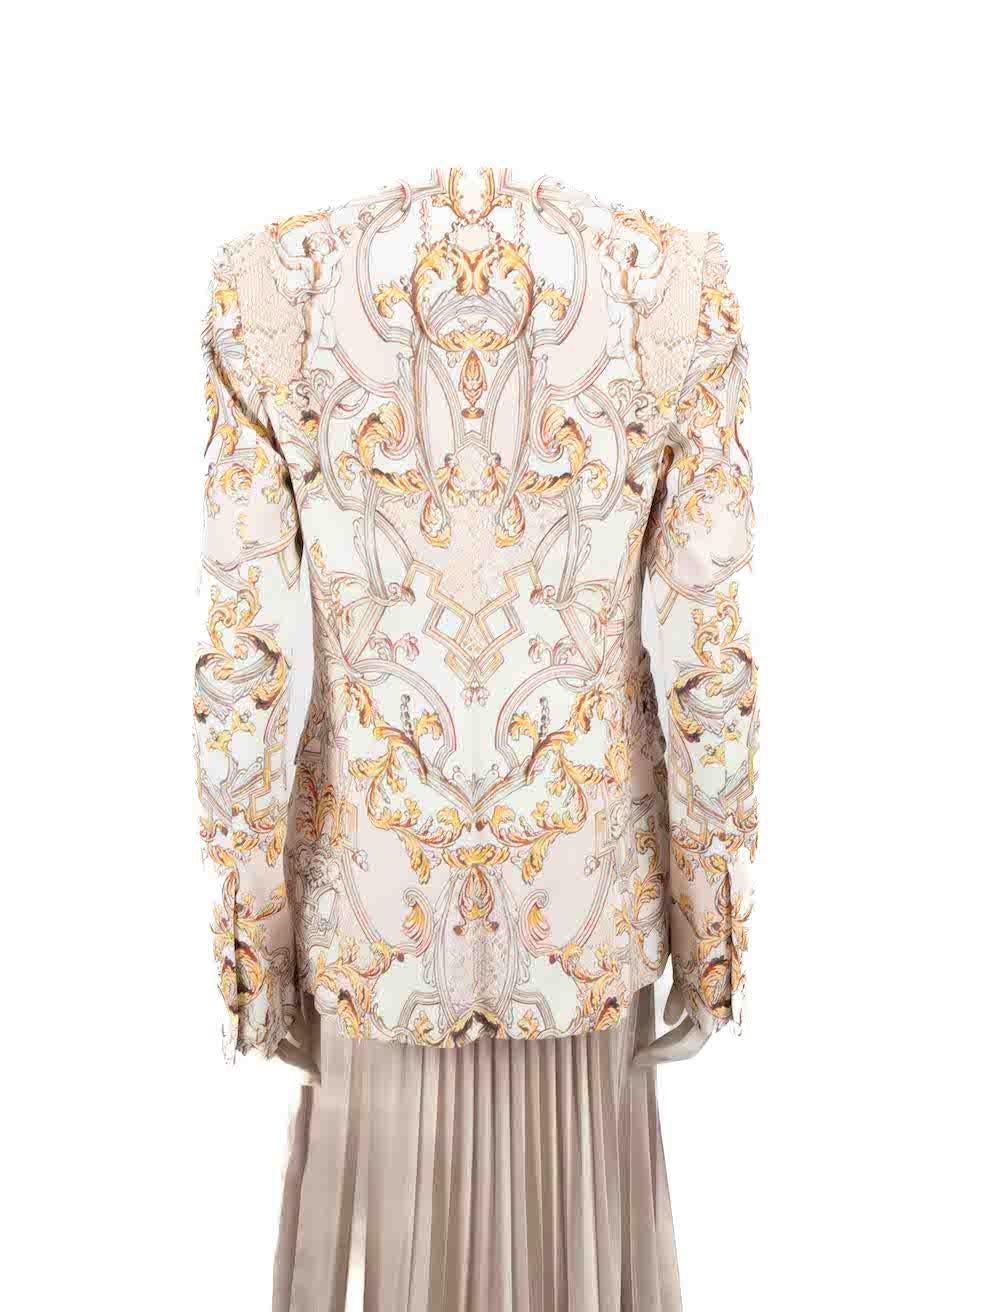 Roberto Cavalli Just Cavalli Snakeskin Printed Blazer Size L In Excellent Condition For Sale In London, GB